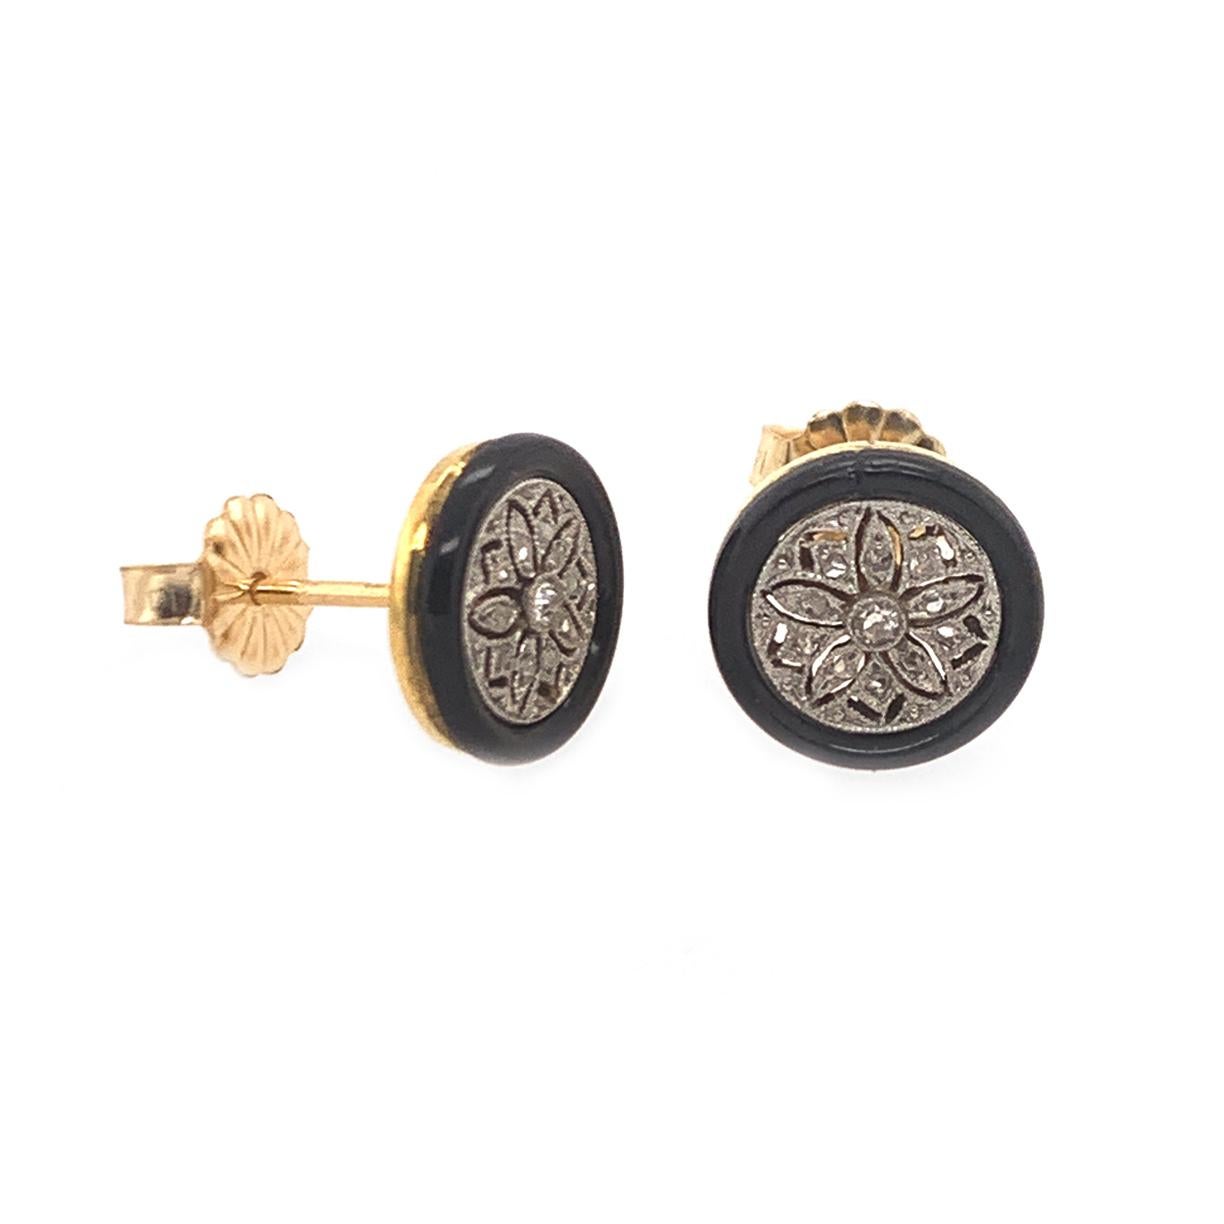 Shimmering stud earrings:  onyx frame around an intricate openwork floret design diamond center.  The diamonds are  all original and are set in platinum.  Milgrain detailing.  14K mellow yellow gold backings and posts. Petite size, measuring 0.37